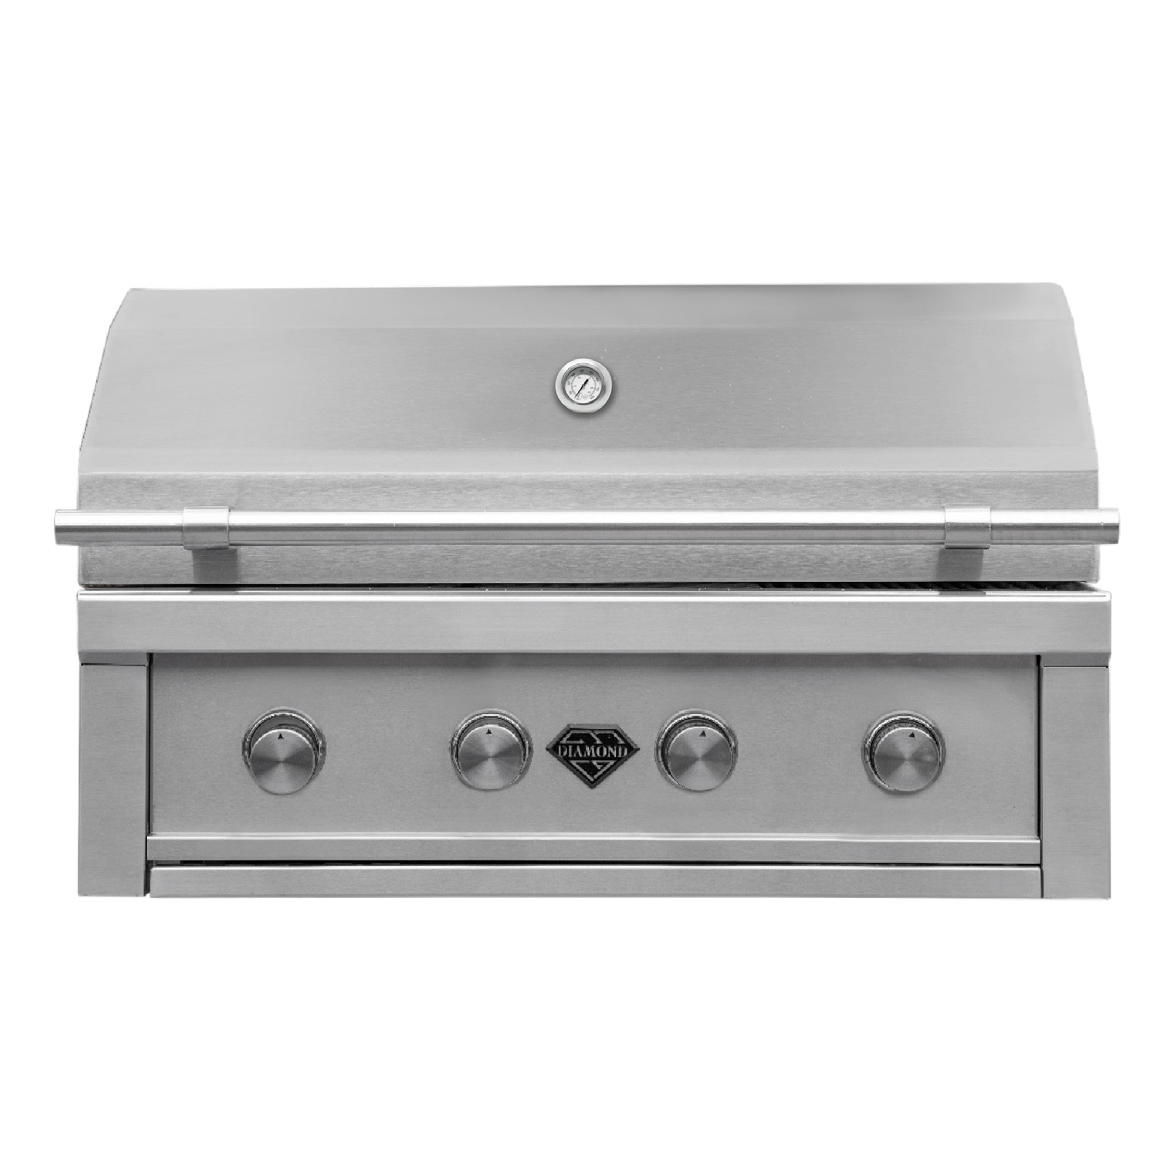 Diamond Grill BBQ 36" Stainless Steel Natural Gas 4-Burner Grill